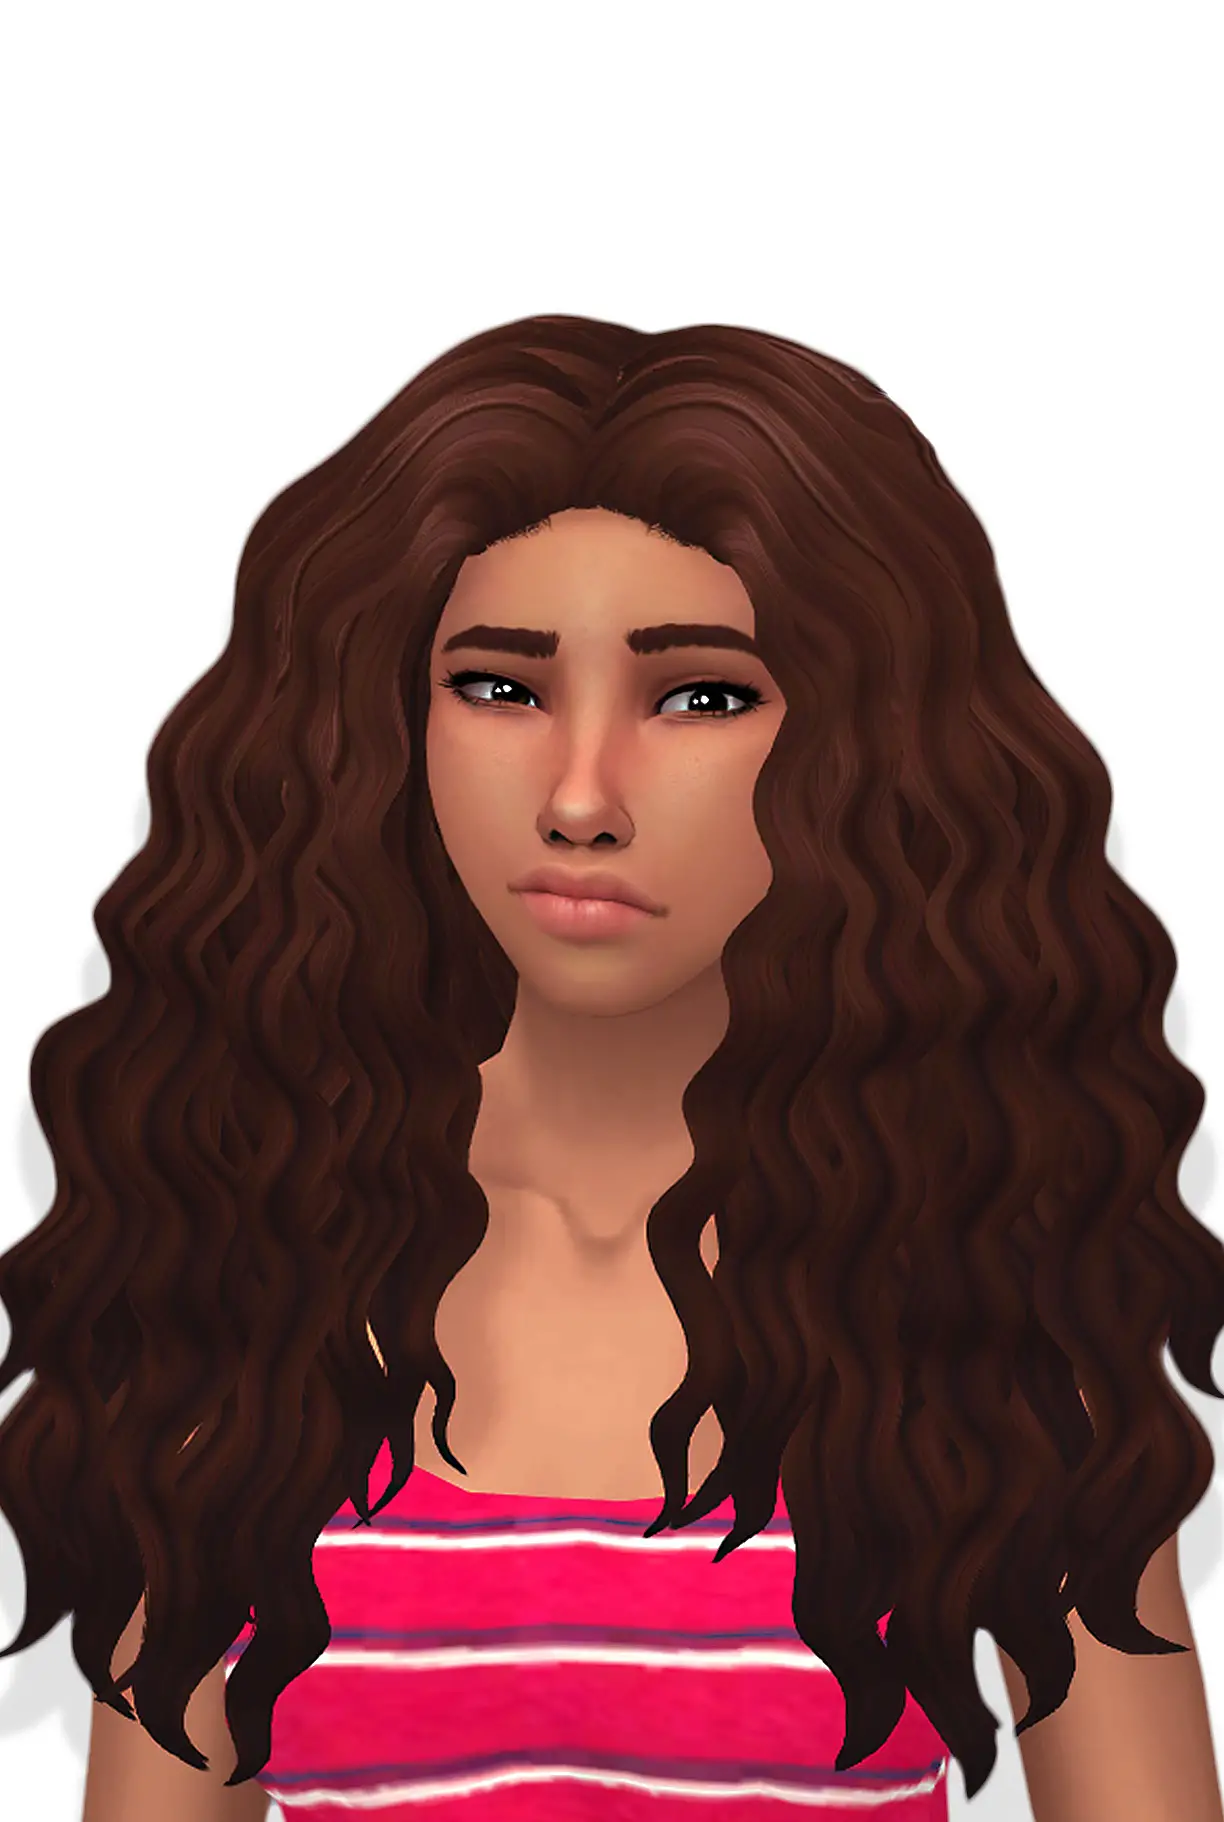 is there a mod that adds hair colors to all sims 4 hair